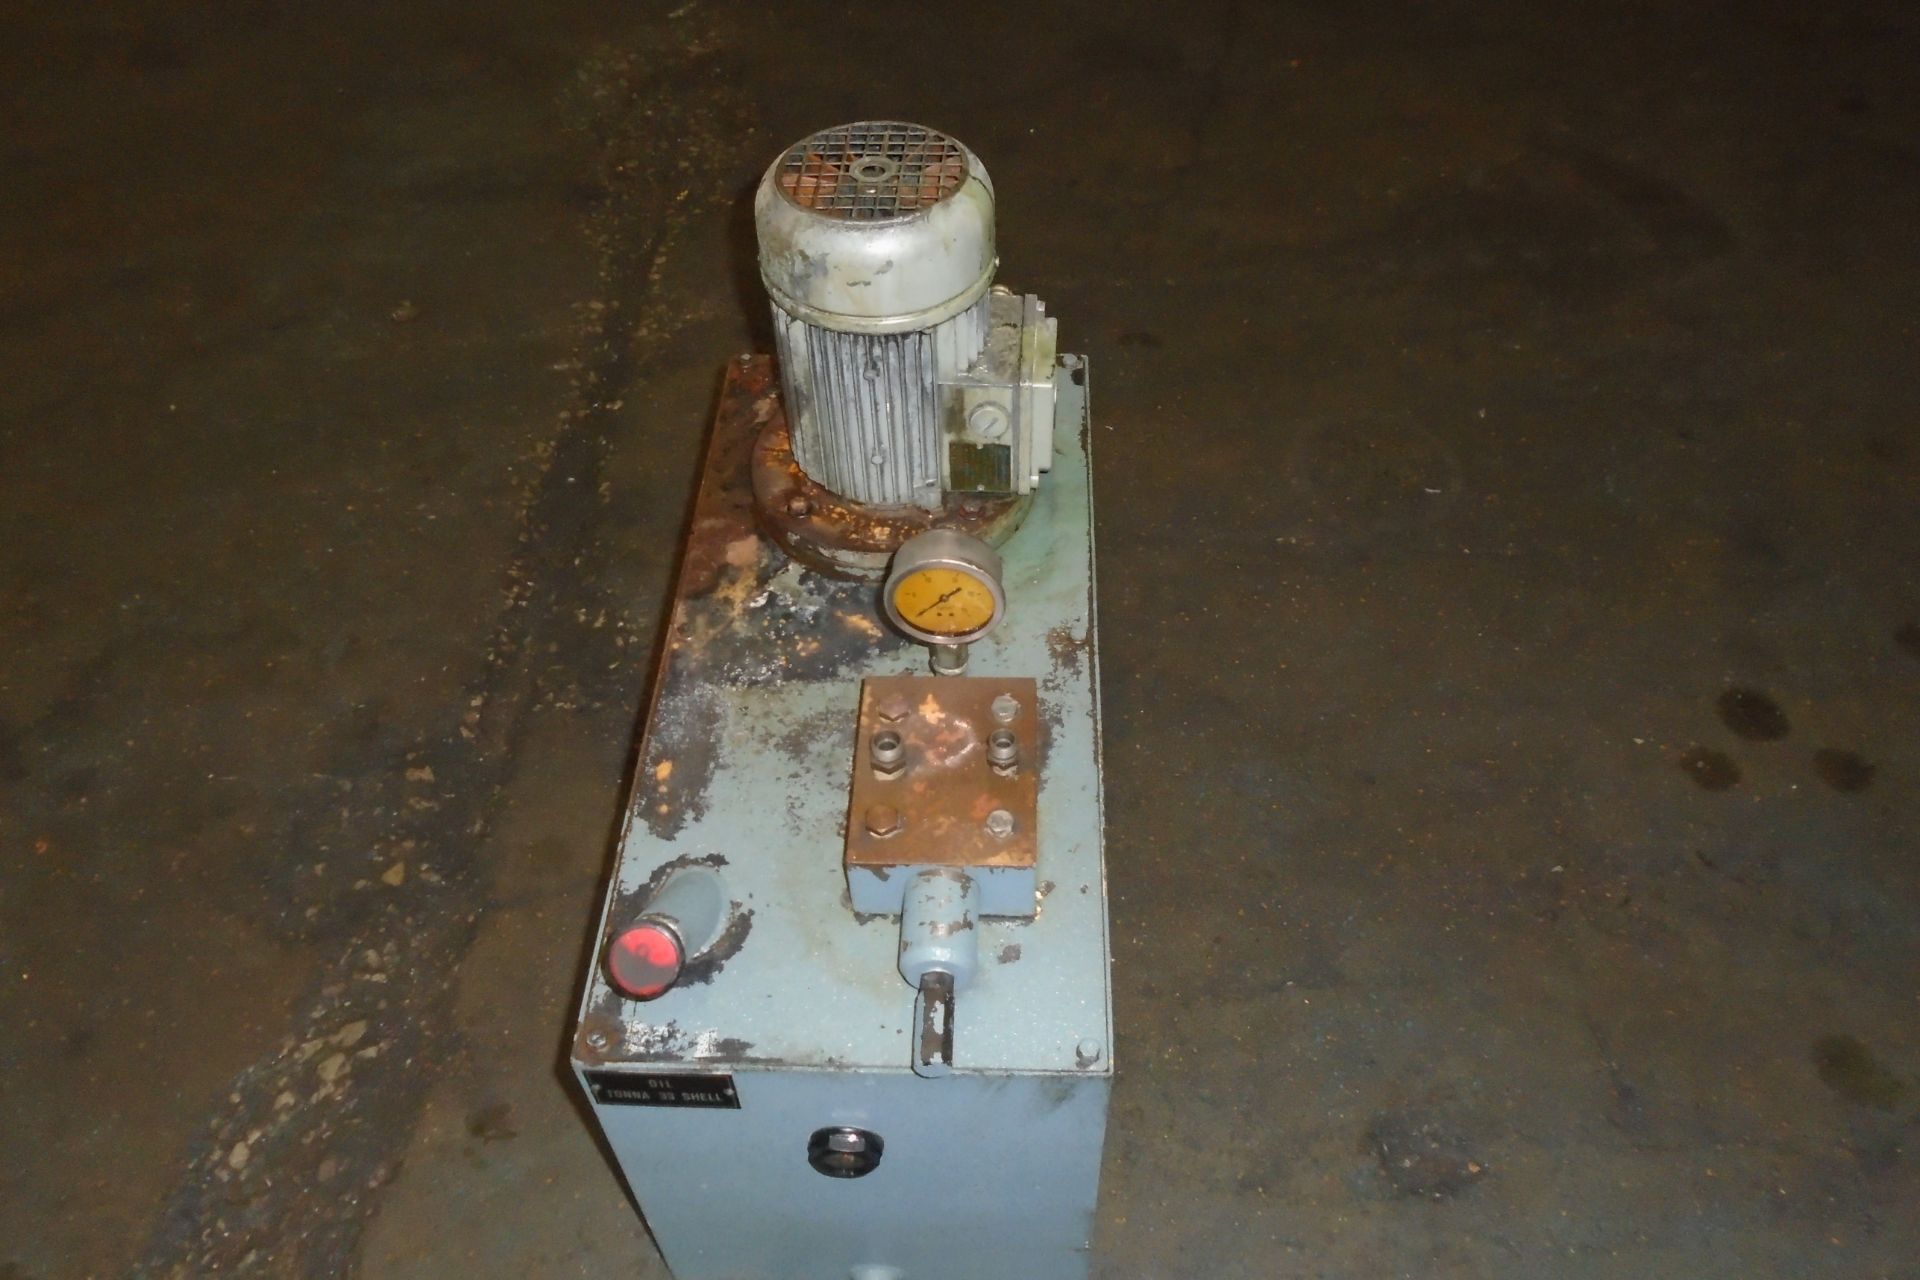 Grisetti RT-A1000 Grinder Hydraulic Tank / Power Supply 220/440V Tank Dimensions: 24” x 11” x 12” - Image 3 of 3